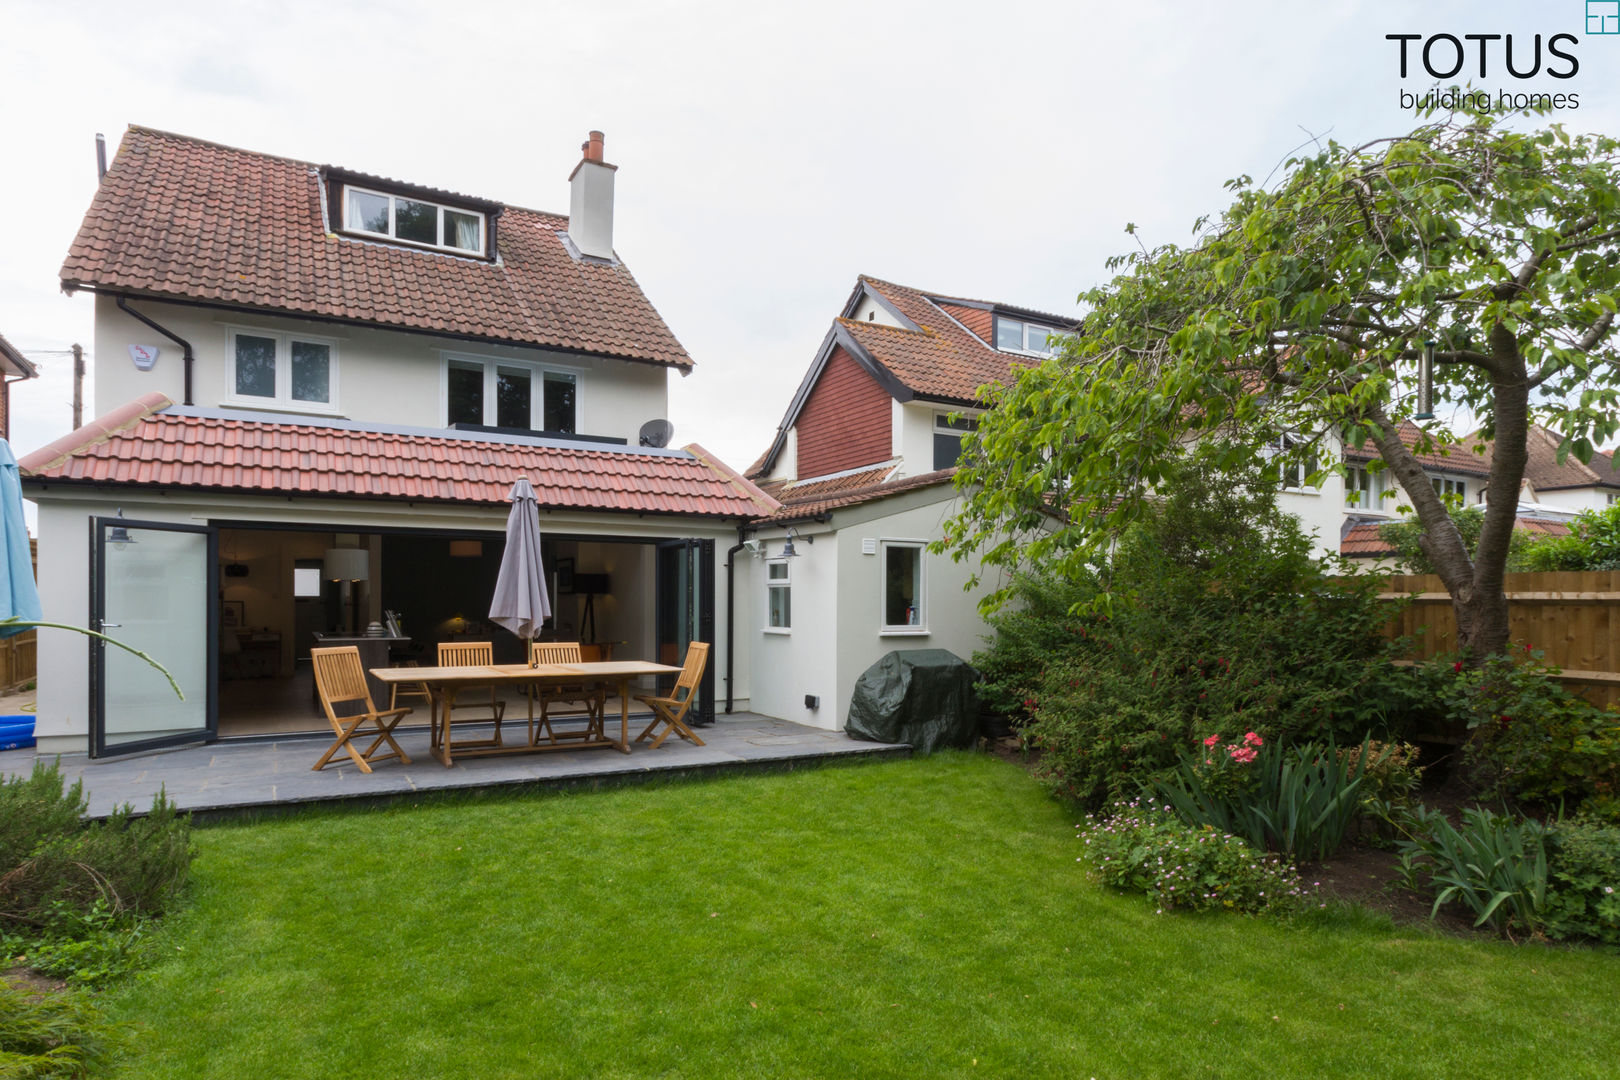 New life for a 1920s home - extension and full renovation, Thames Ditton, Surrey, TOTUS TOTUS Klassische Häuser